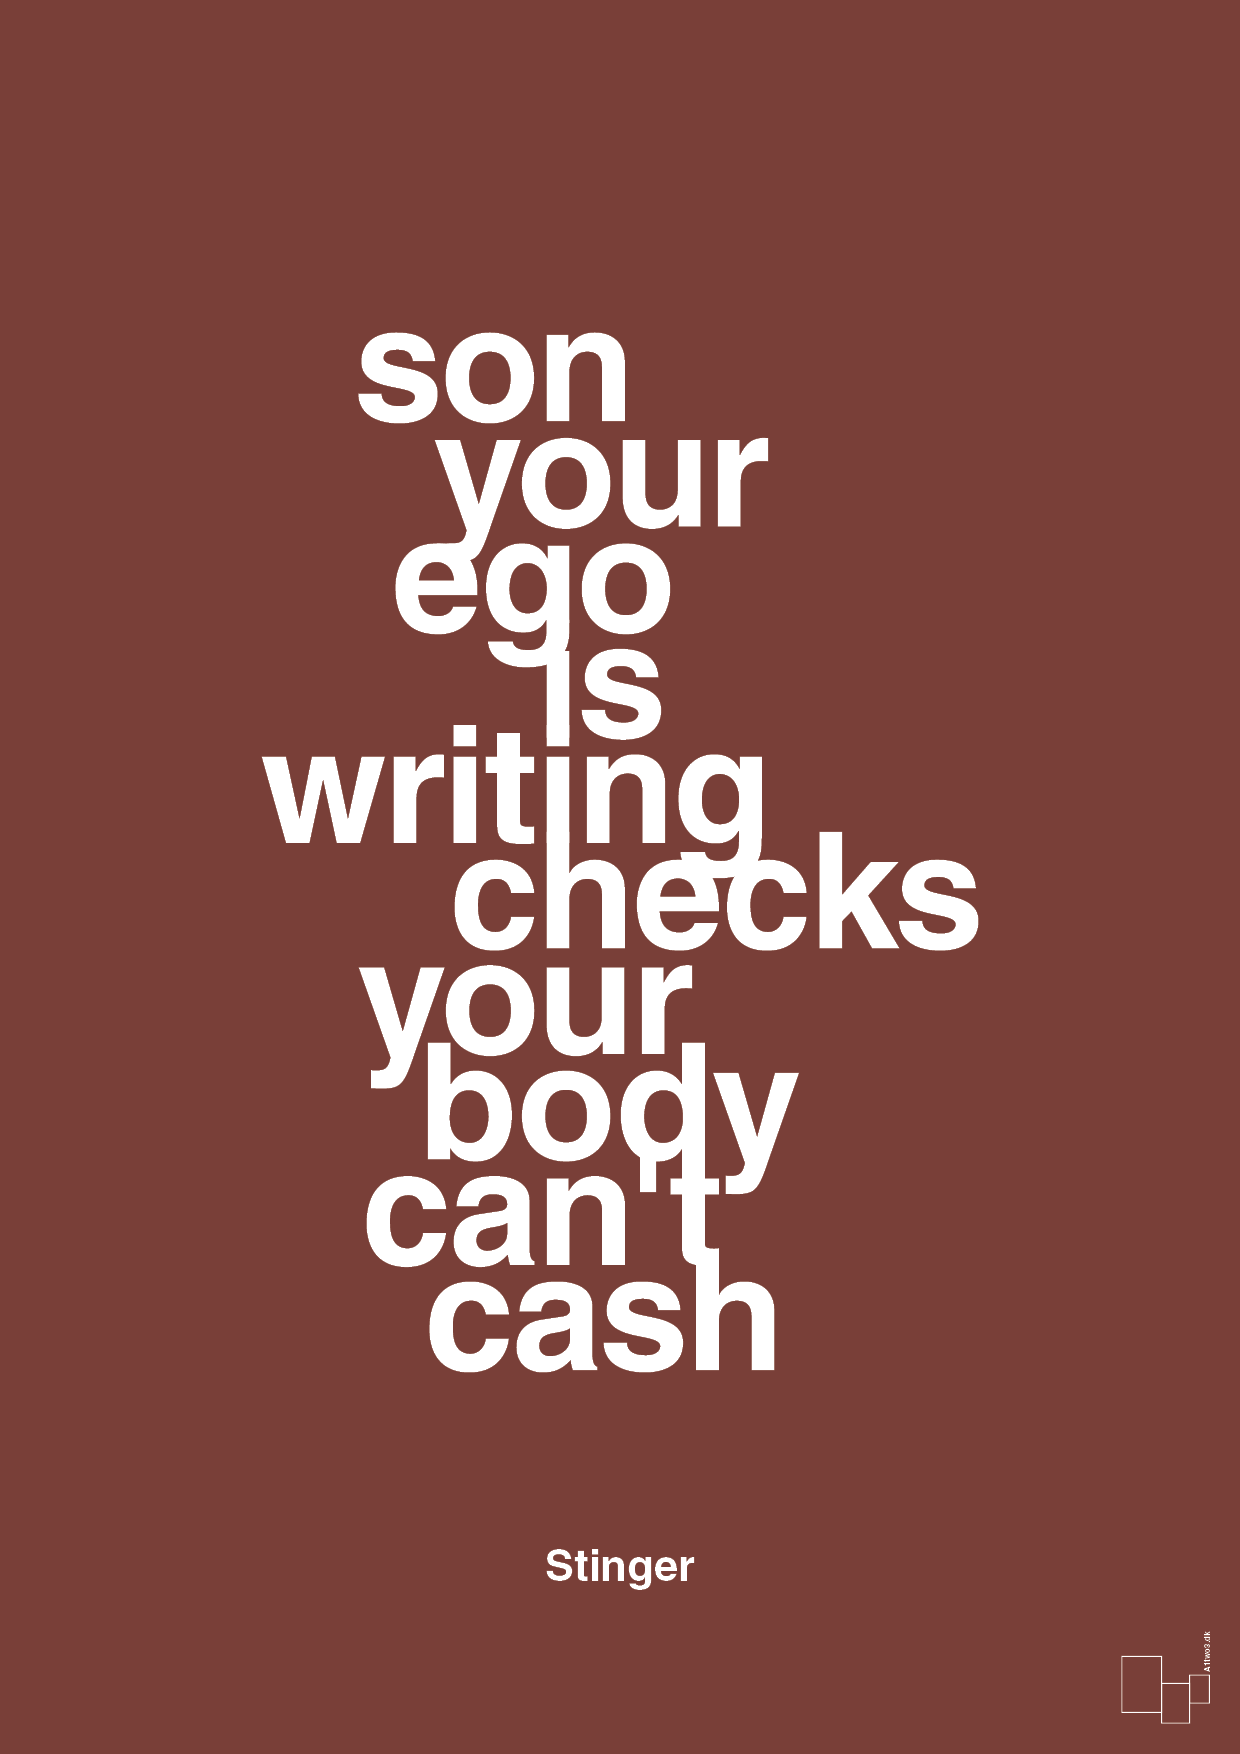 son your ego is writing checks your body can't cash - Plakat med Citater i Red Pepper